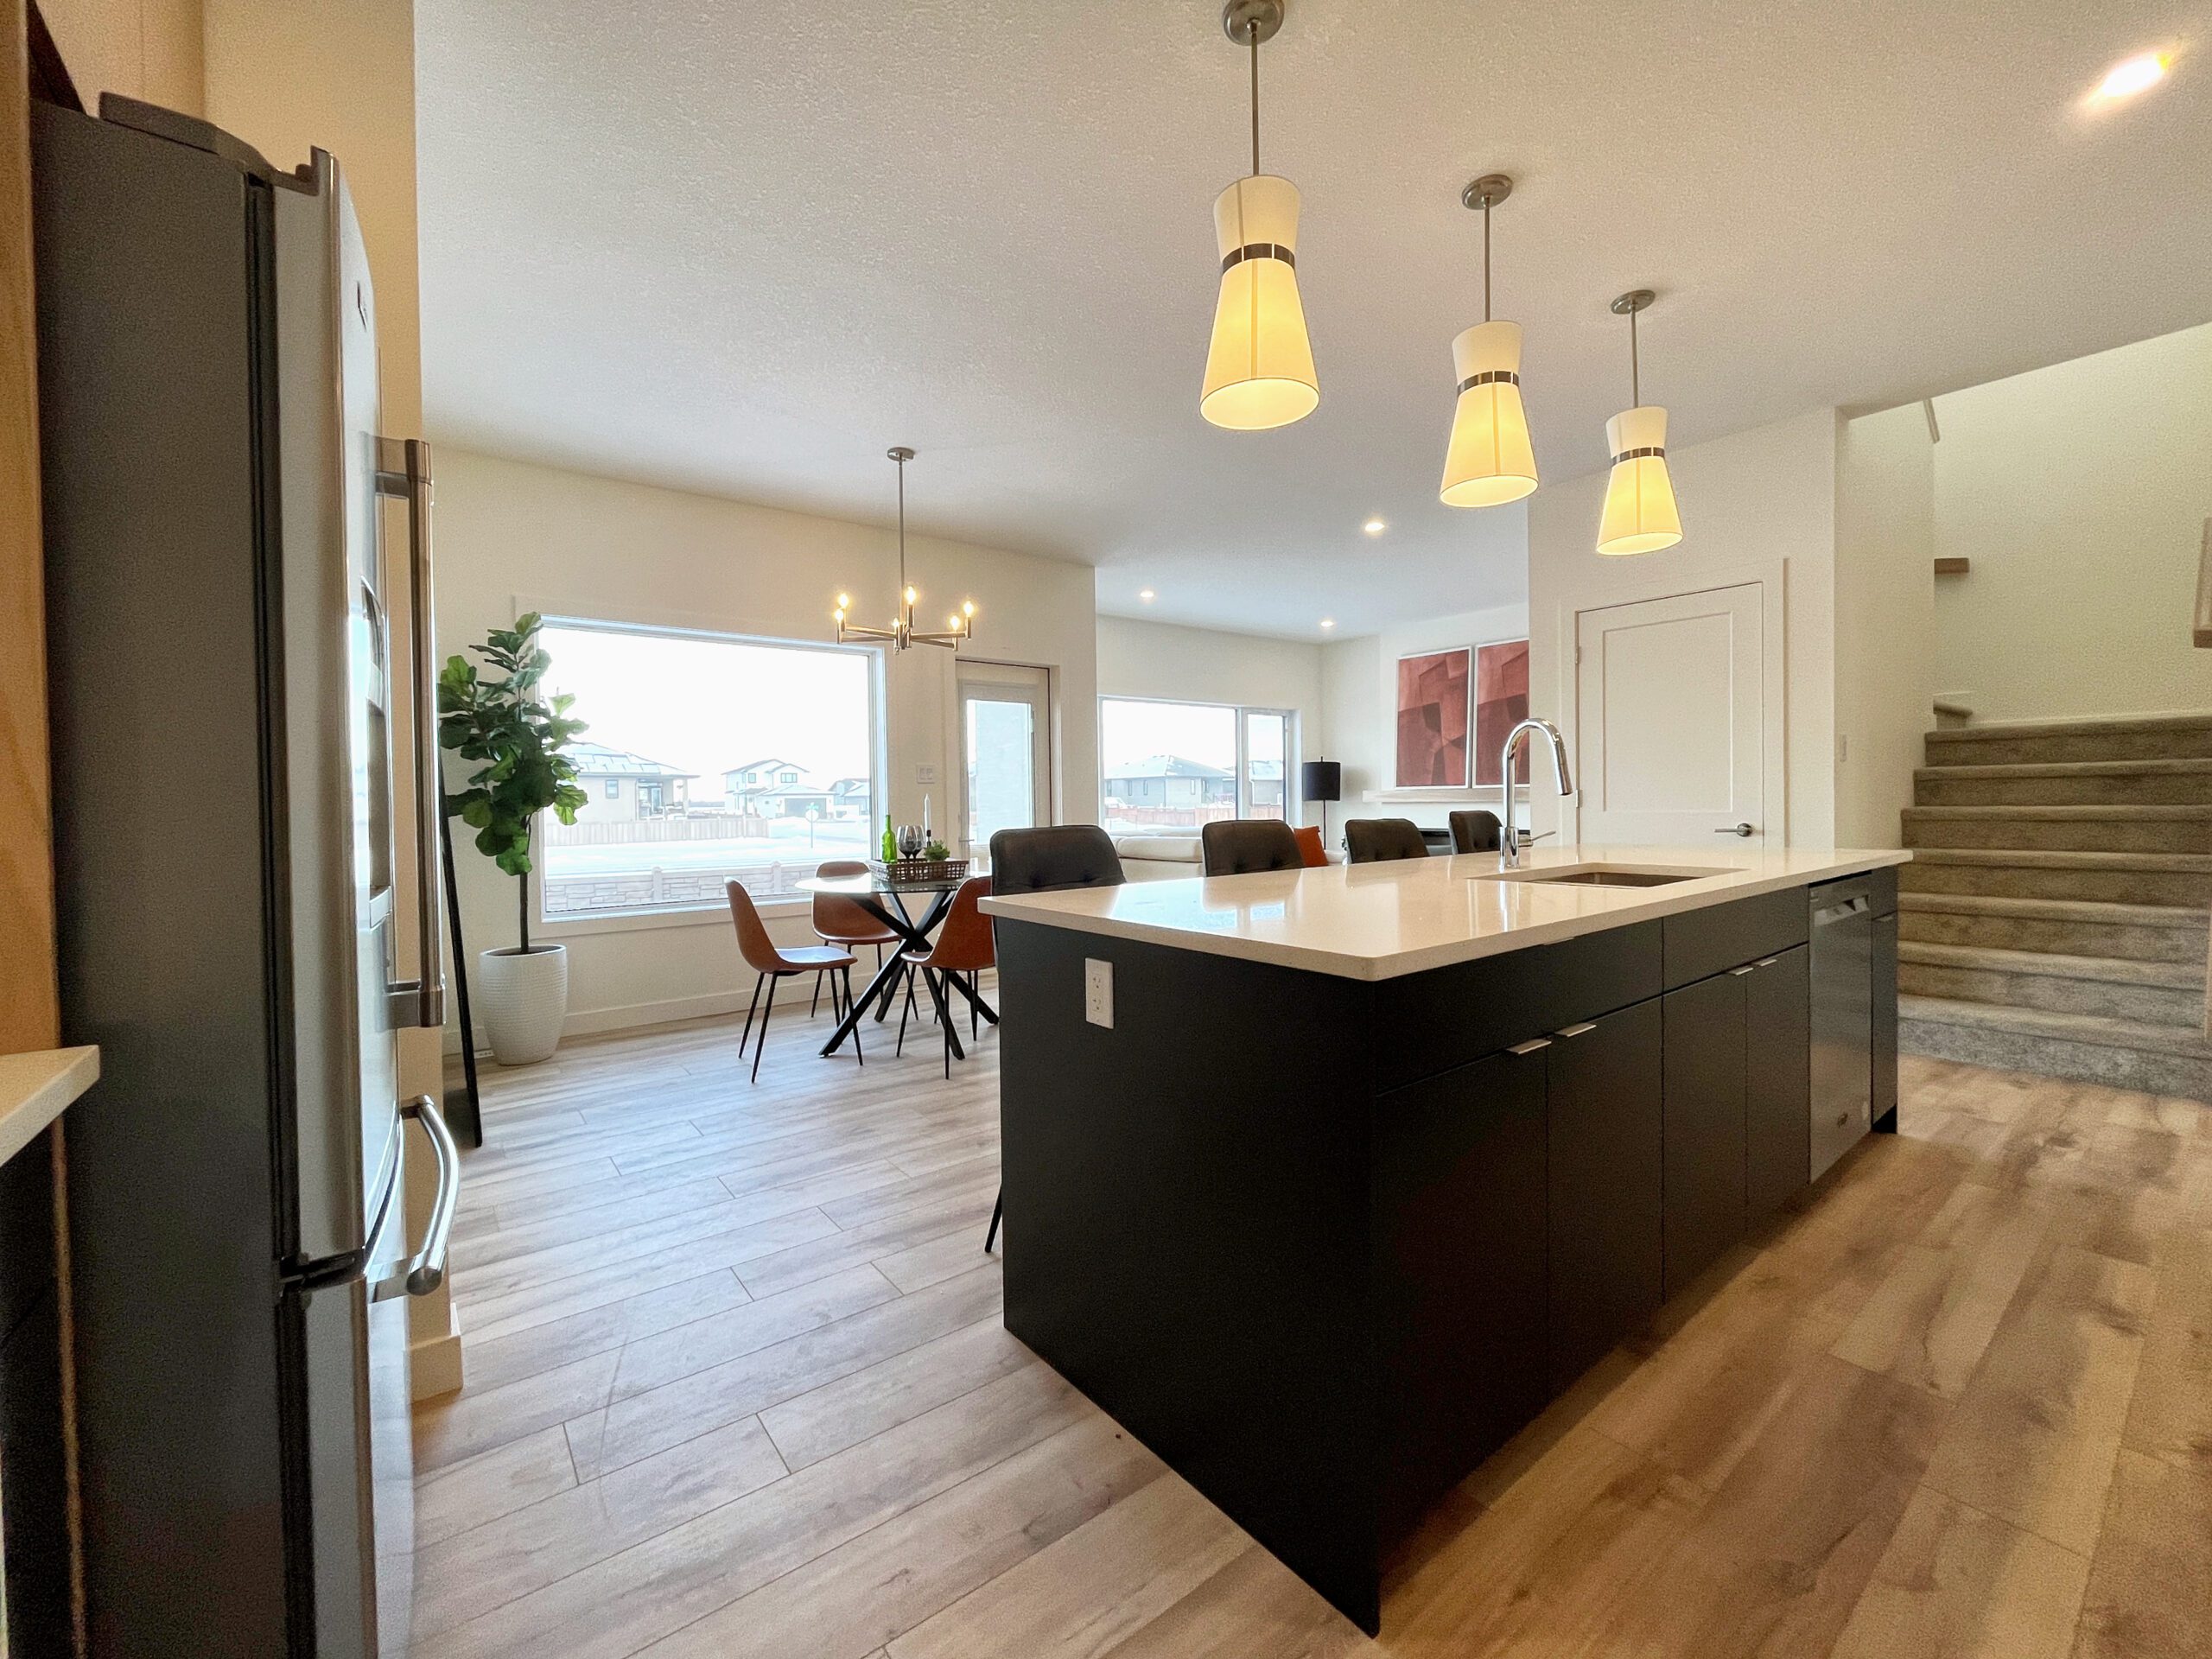 A spacious kitchen and dining area in a two-storey home in Pilot Butte.